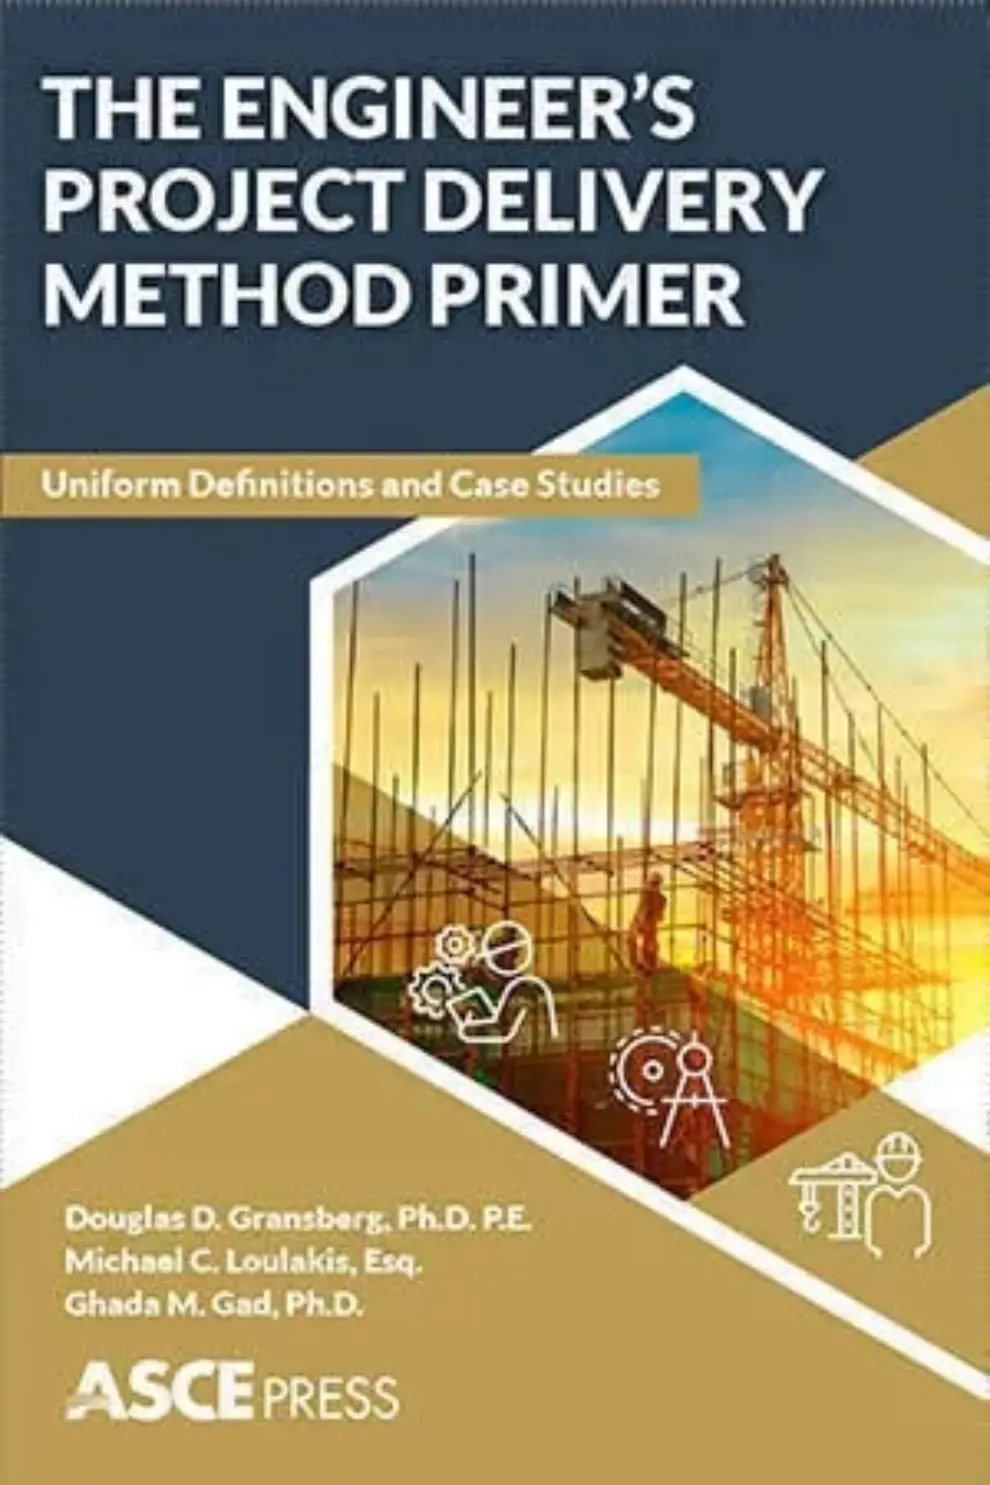 New ASCE Press Book Offers Greater Understanding  of Project Delivery Methods